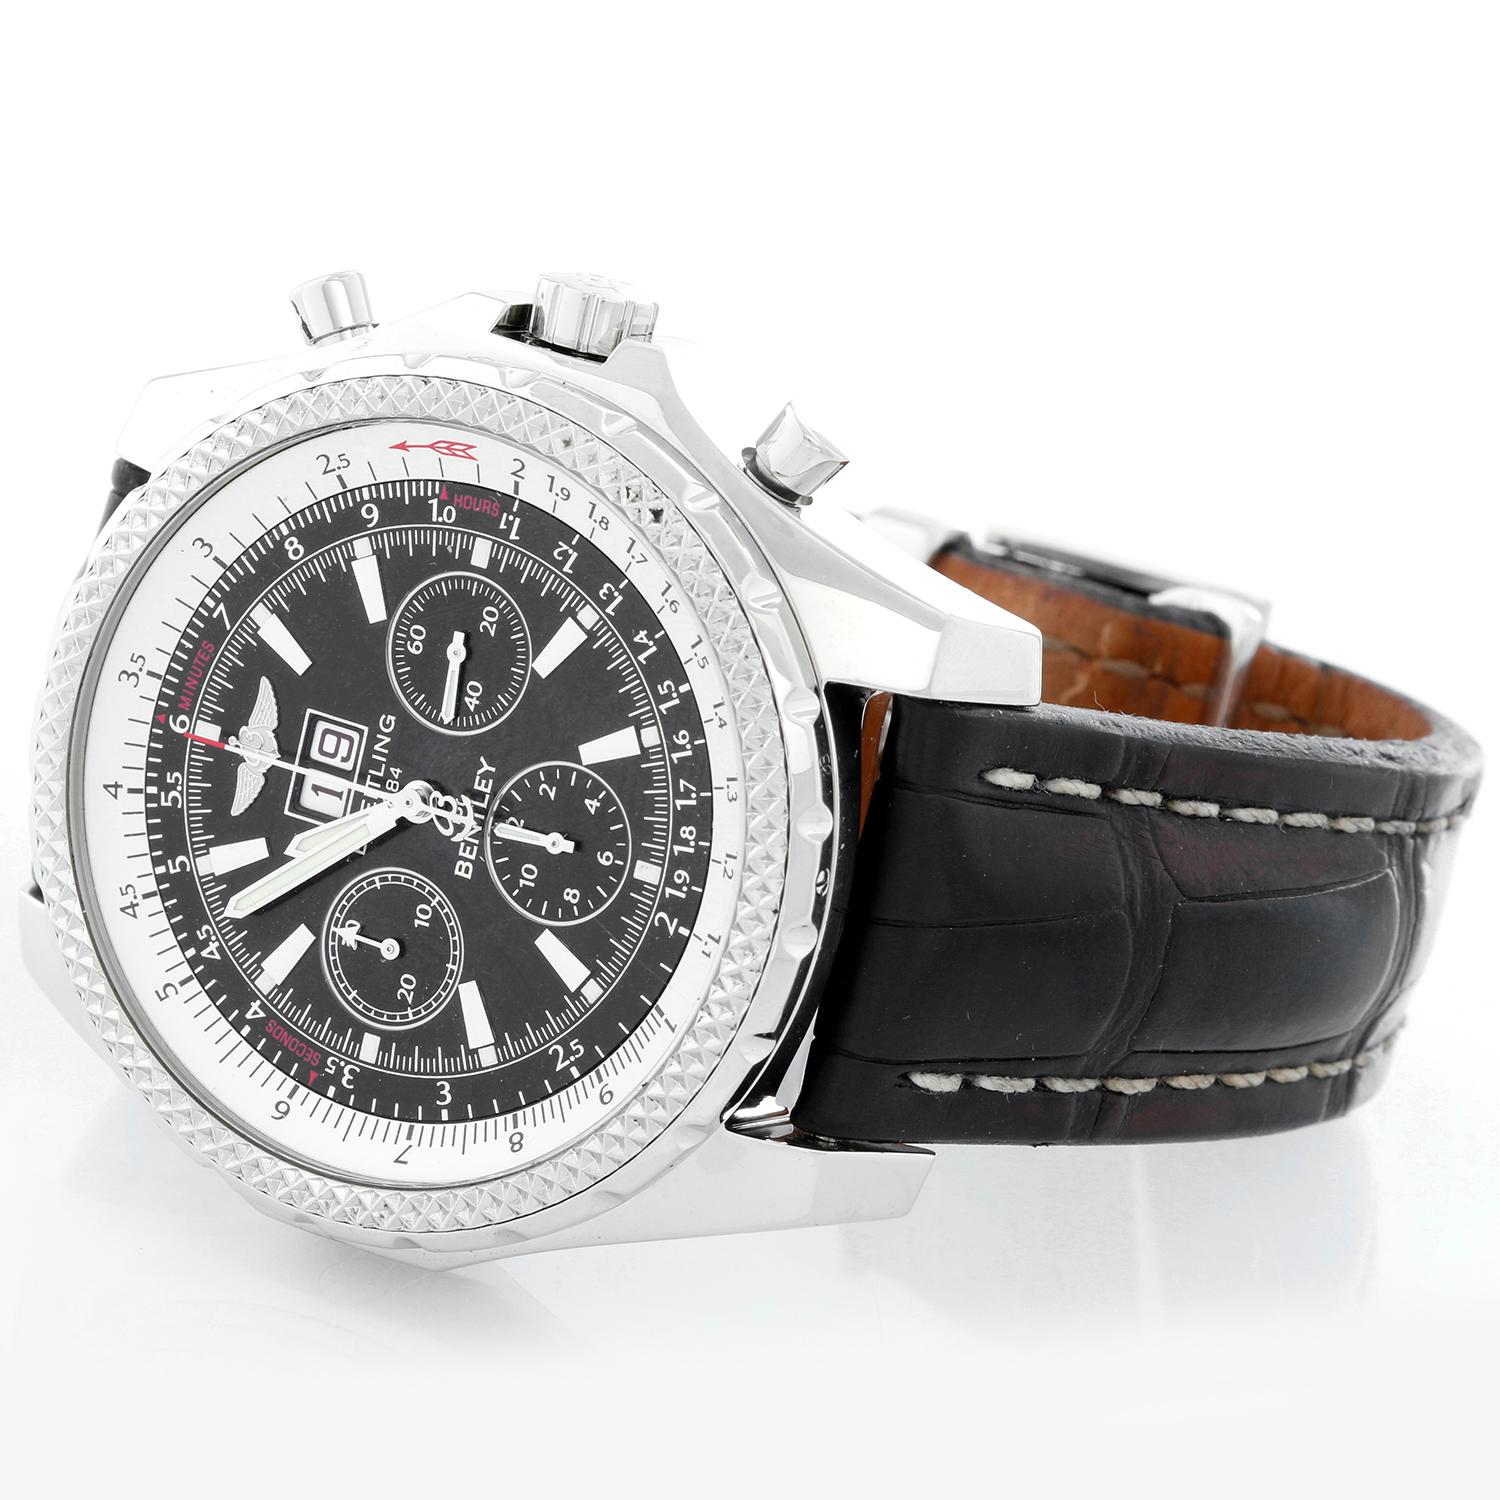 Breitling Bentley Chronograph Men's Steel Watch Black Dial A44362 - Automatic winding chronograph. Stainless steel case with rotating tachymeter bezel (49mm diameter). Black dial with hour, minute and seconds recorders and big date . Black Breitling